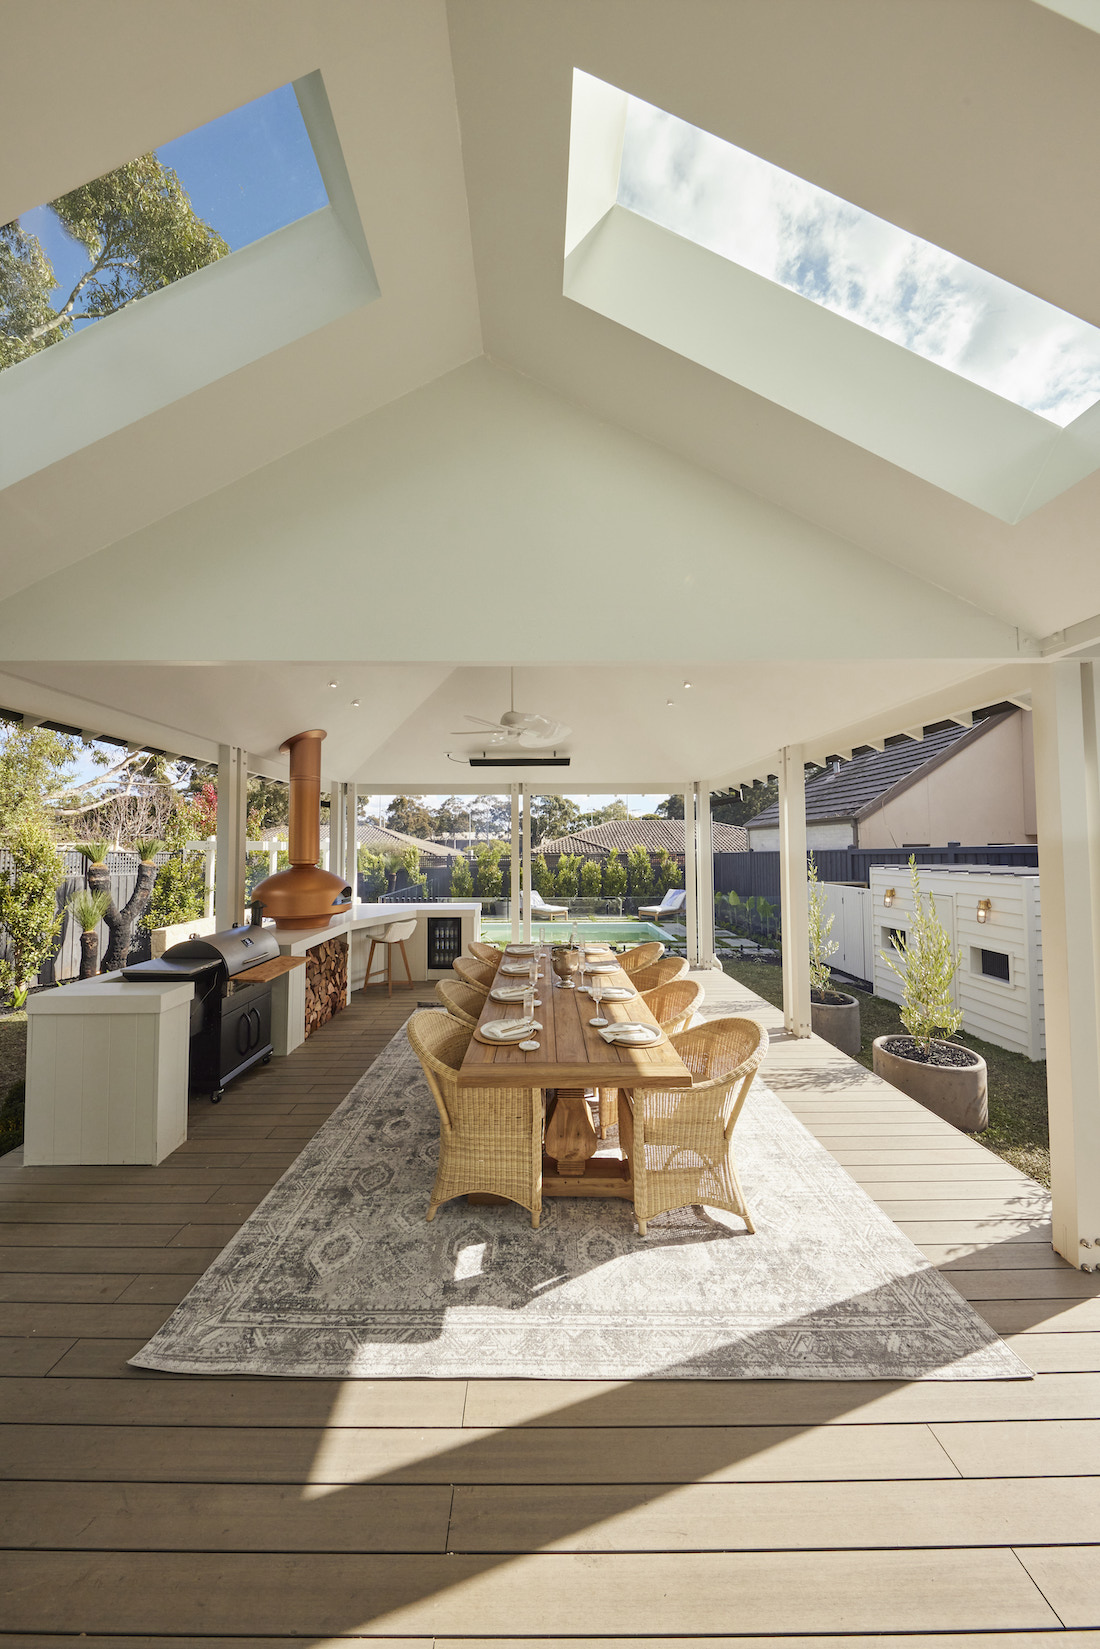 Covered outdoor space with skylights